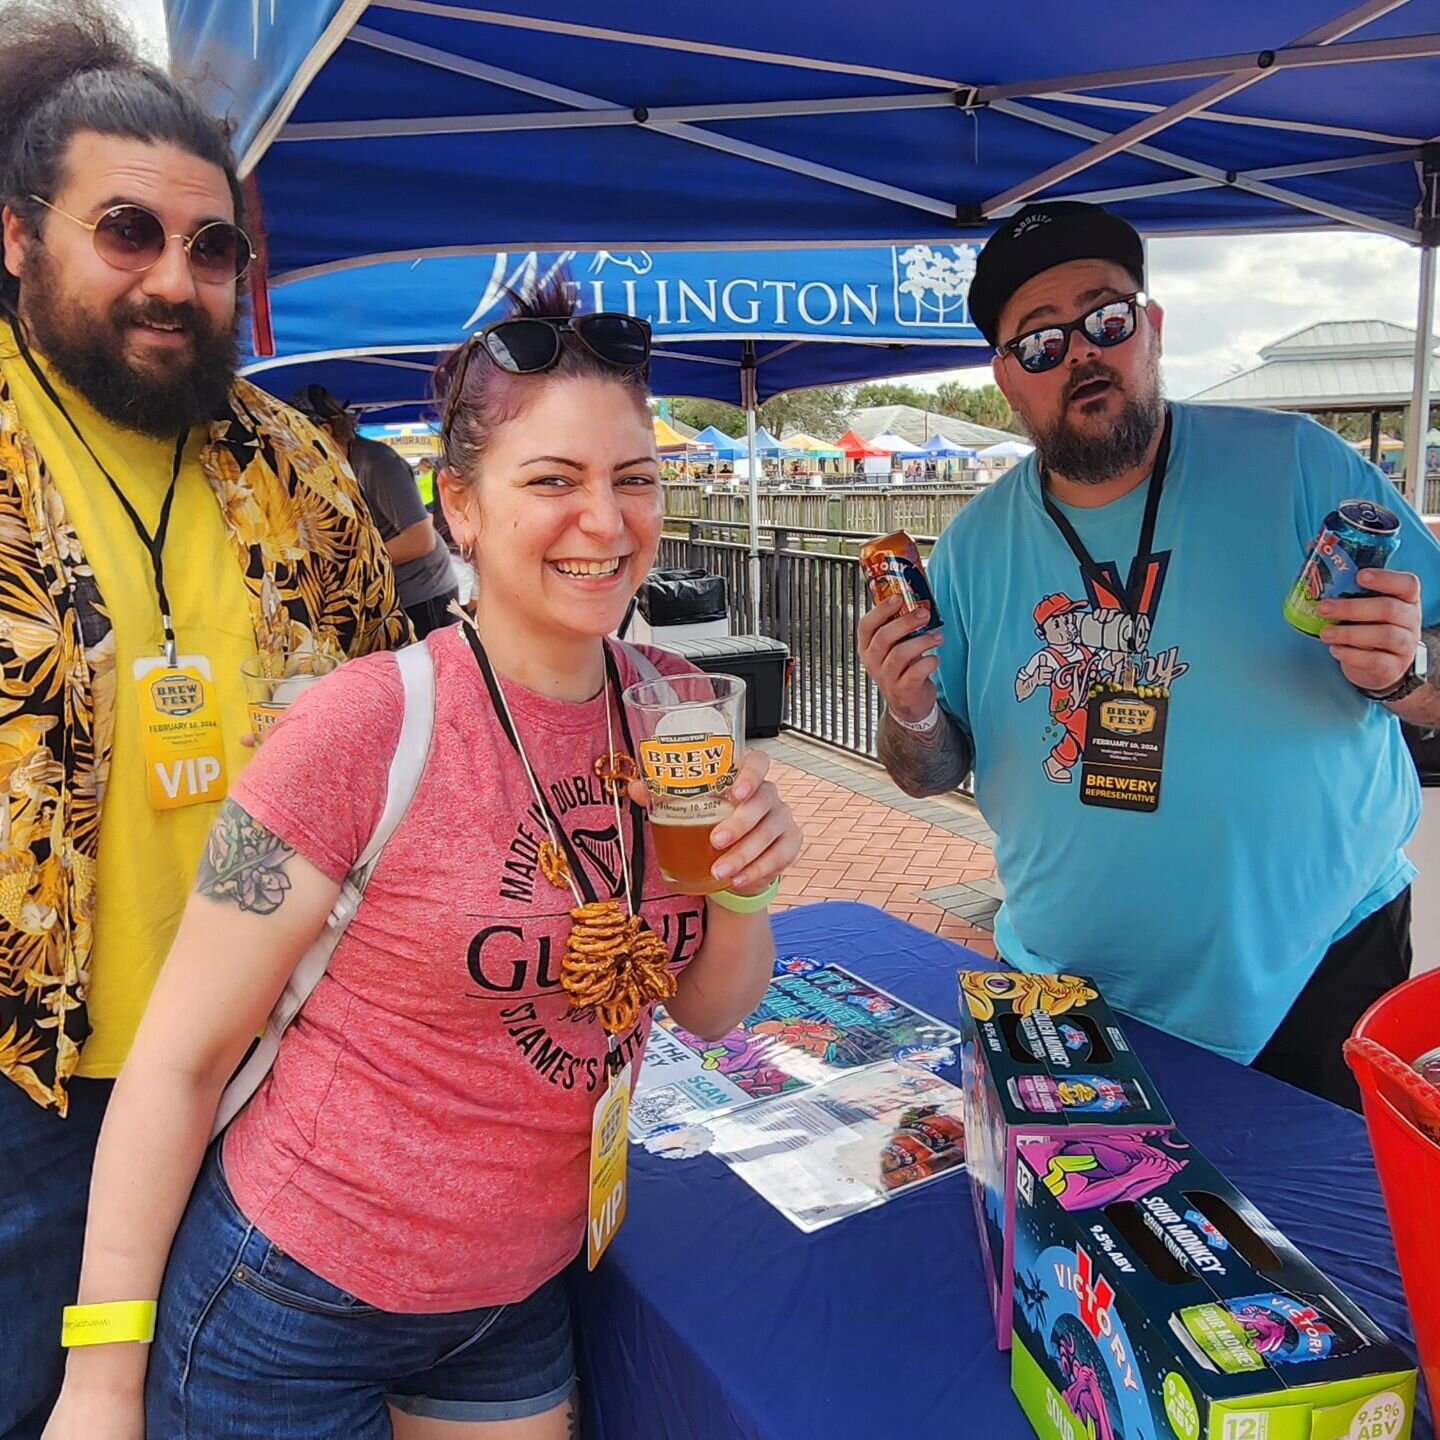 Wellington Classic Brew Fest 🍺 is officially underway! We couldn't ask for better weather or a better crowd 🌤️😎. Our VIPs are in the door enjoying early access, food, and sampling of special limited release beers. General admission is from 3:00 PM